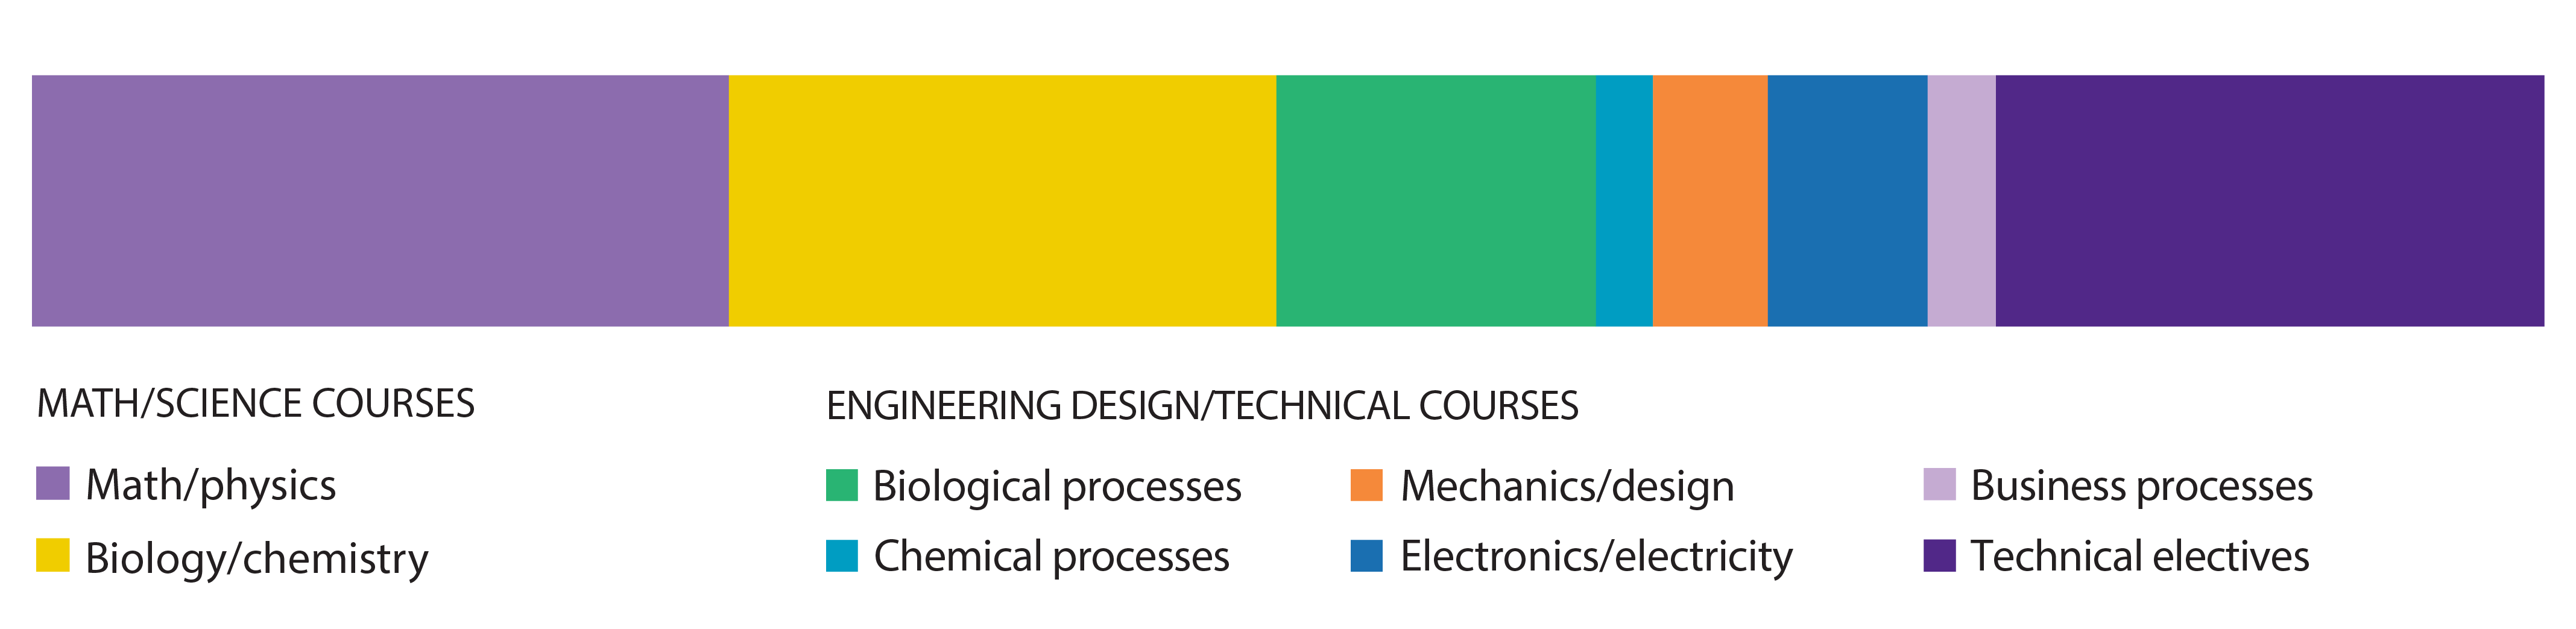 Academic areas graphic for biological systems engineering